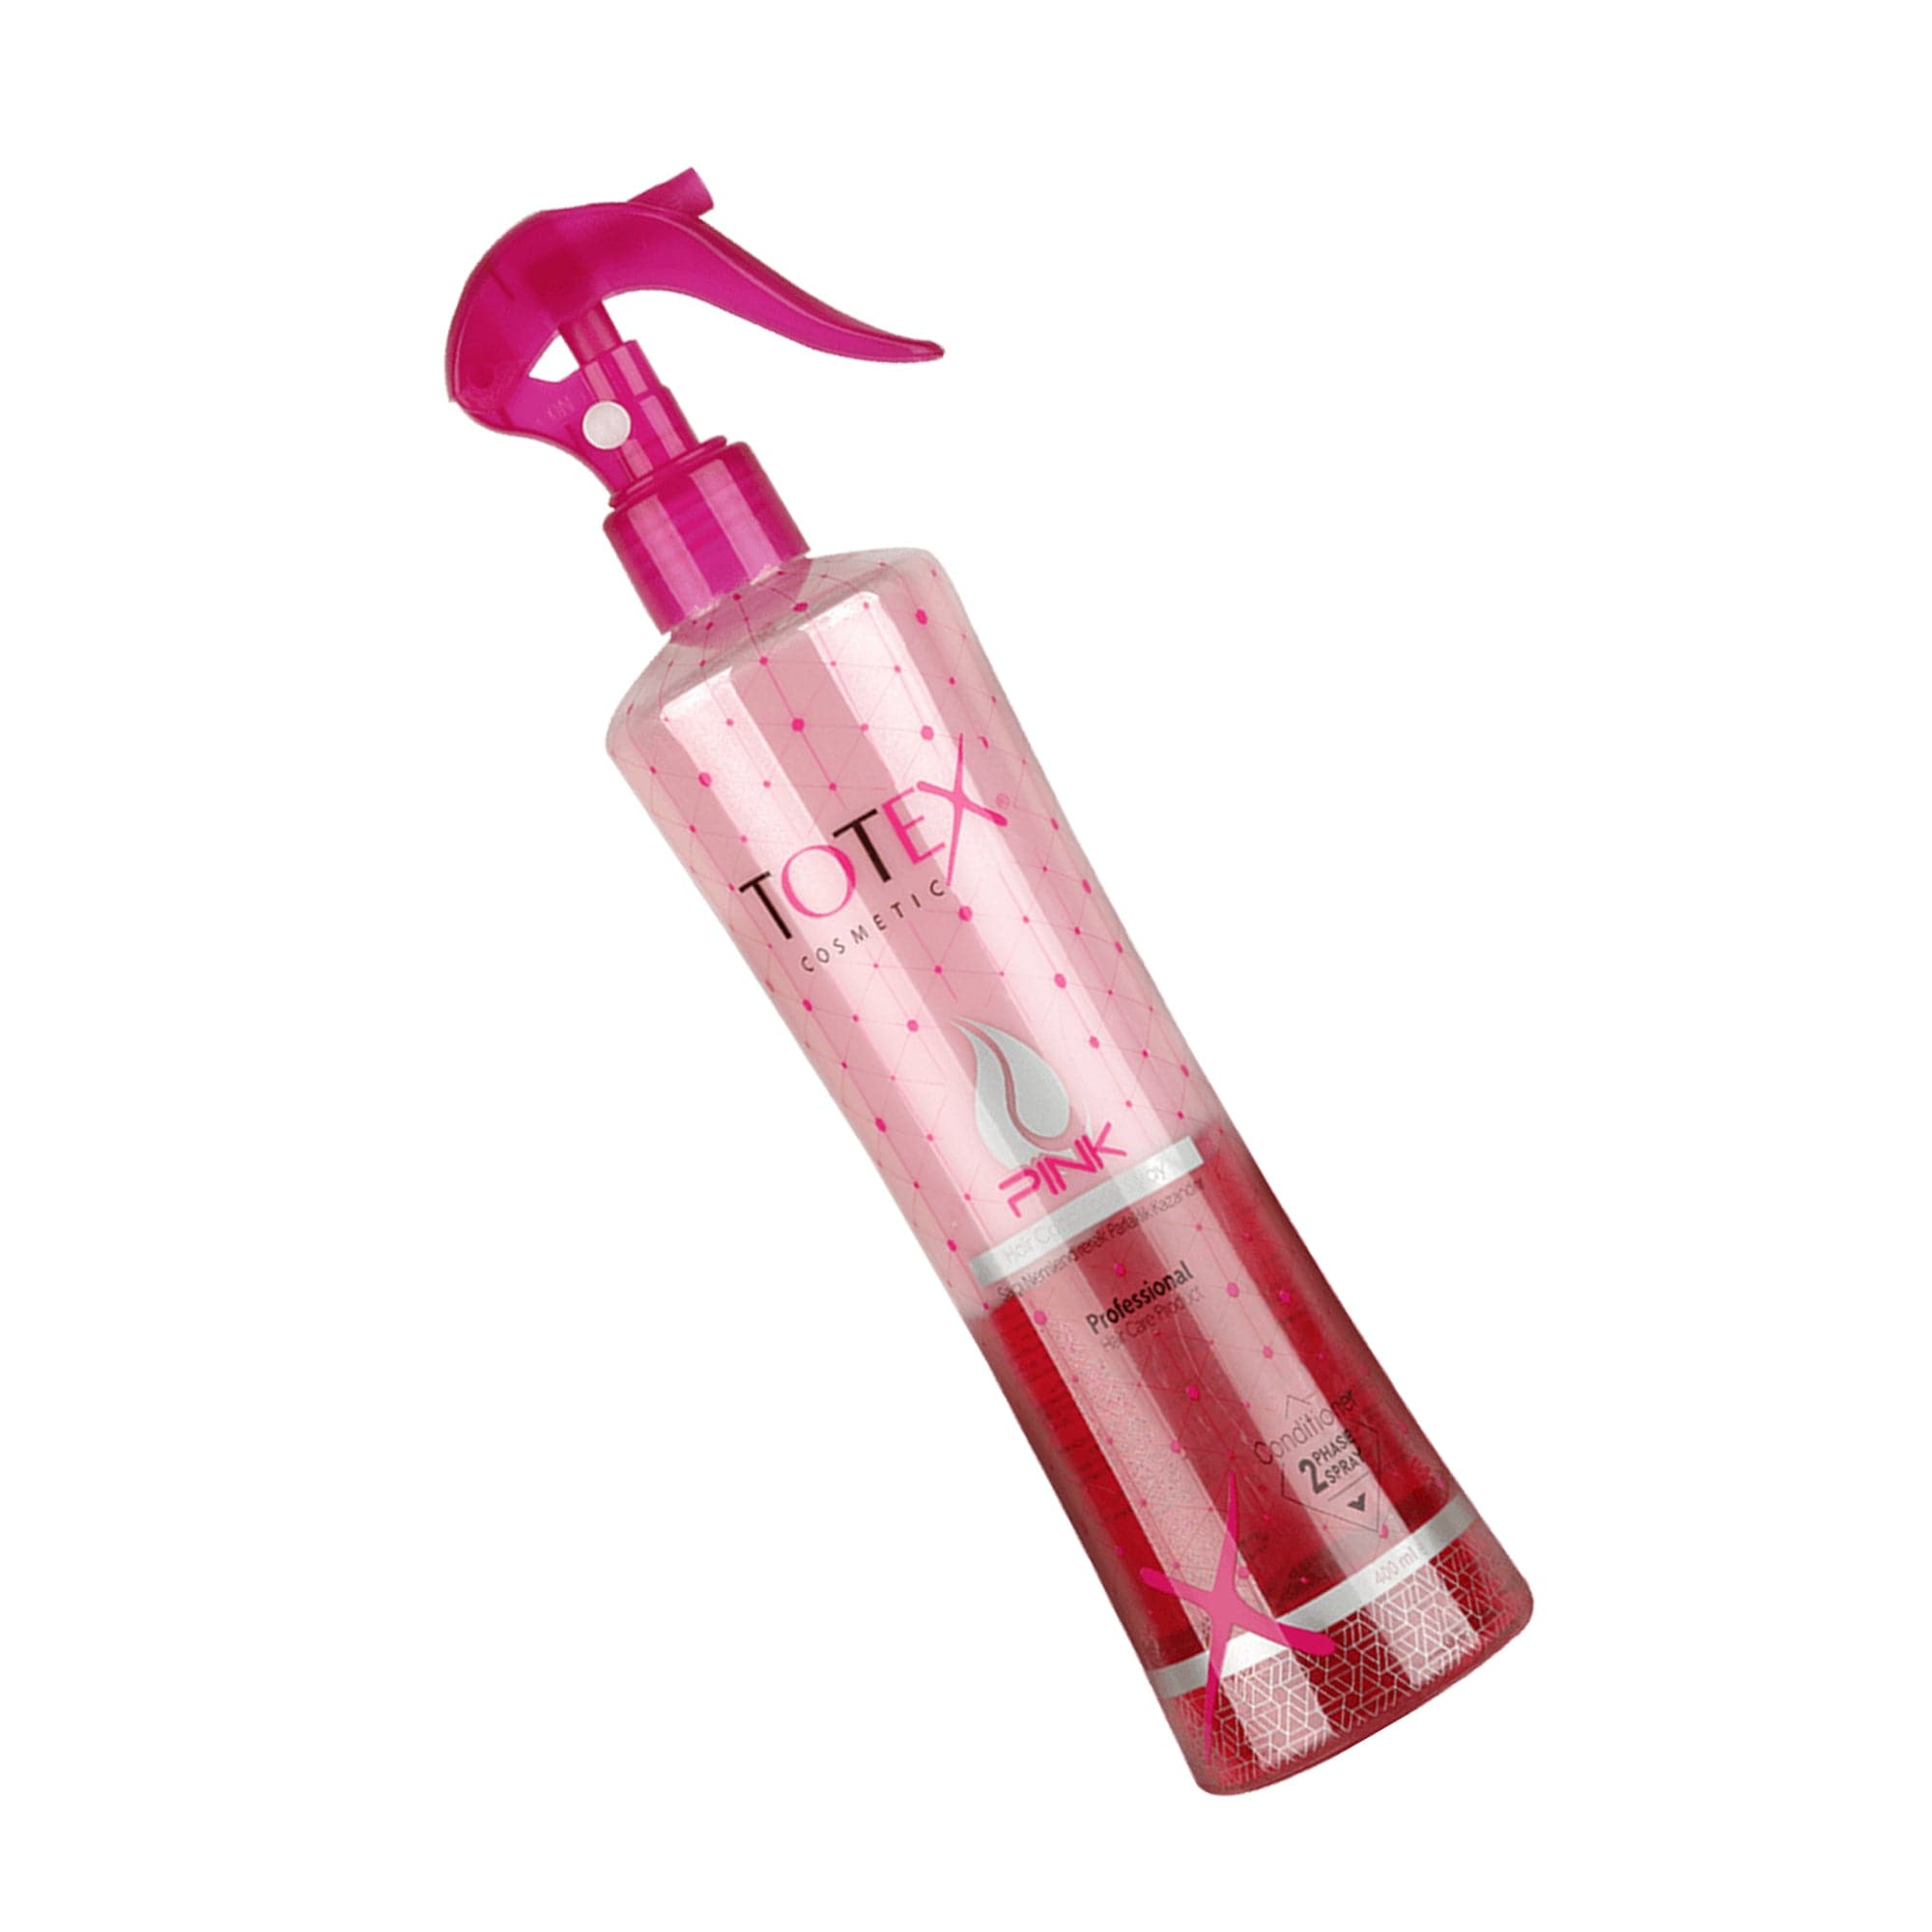 Totex - Two Phase Conditioner Pink 400ml